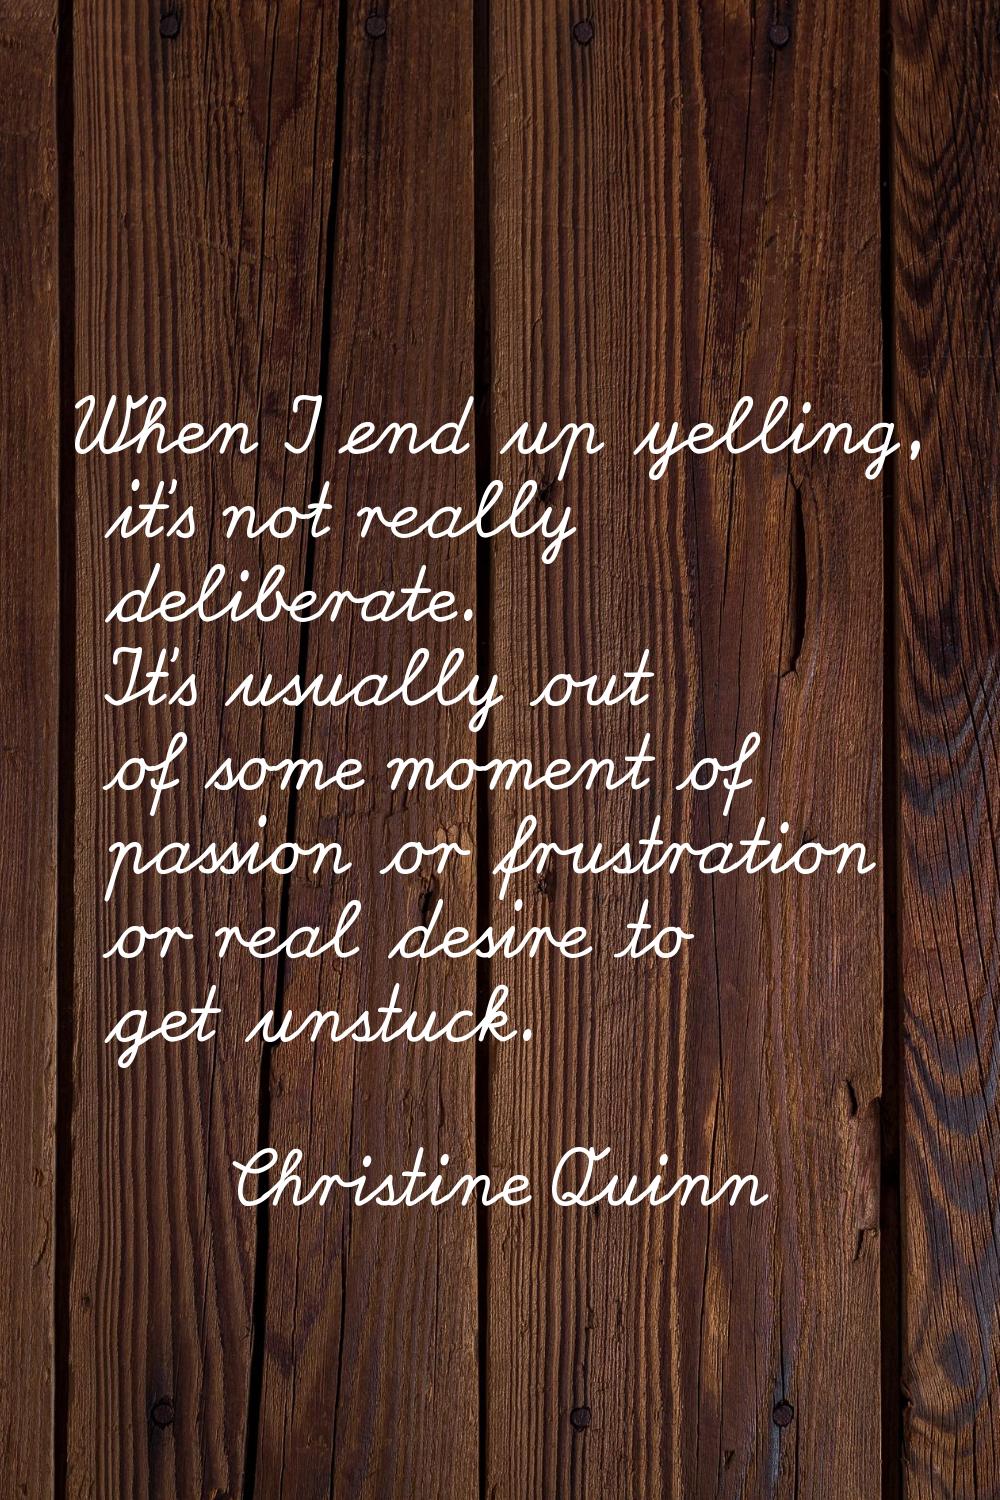 When I end up yelling, it's not really deliberate. It's usually out of some moment of passion or fr